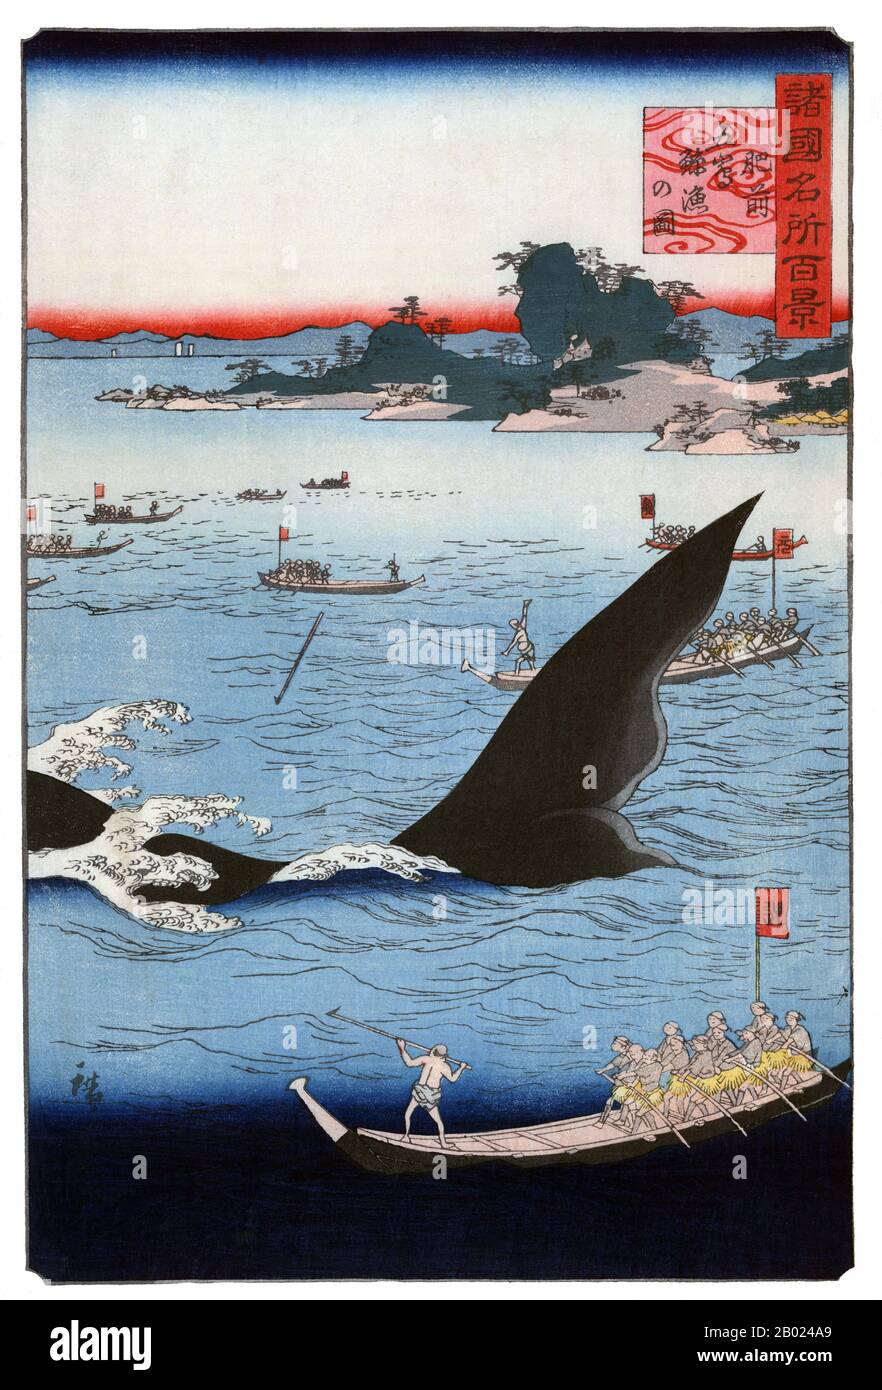 Utagawa Hiroshige II (1826-1869) was the successor and pupil of ukiyo-e print-master Hiroshige, inheriting his name after his death in 1858. He married his master's daughter, though they divorced in 1865, after which he began using the name Kisai Rissho. His work is so similar to his master's that most scholars often confuse their prints. Stock Photo